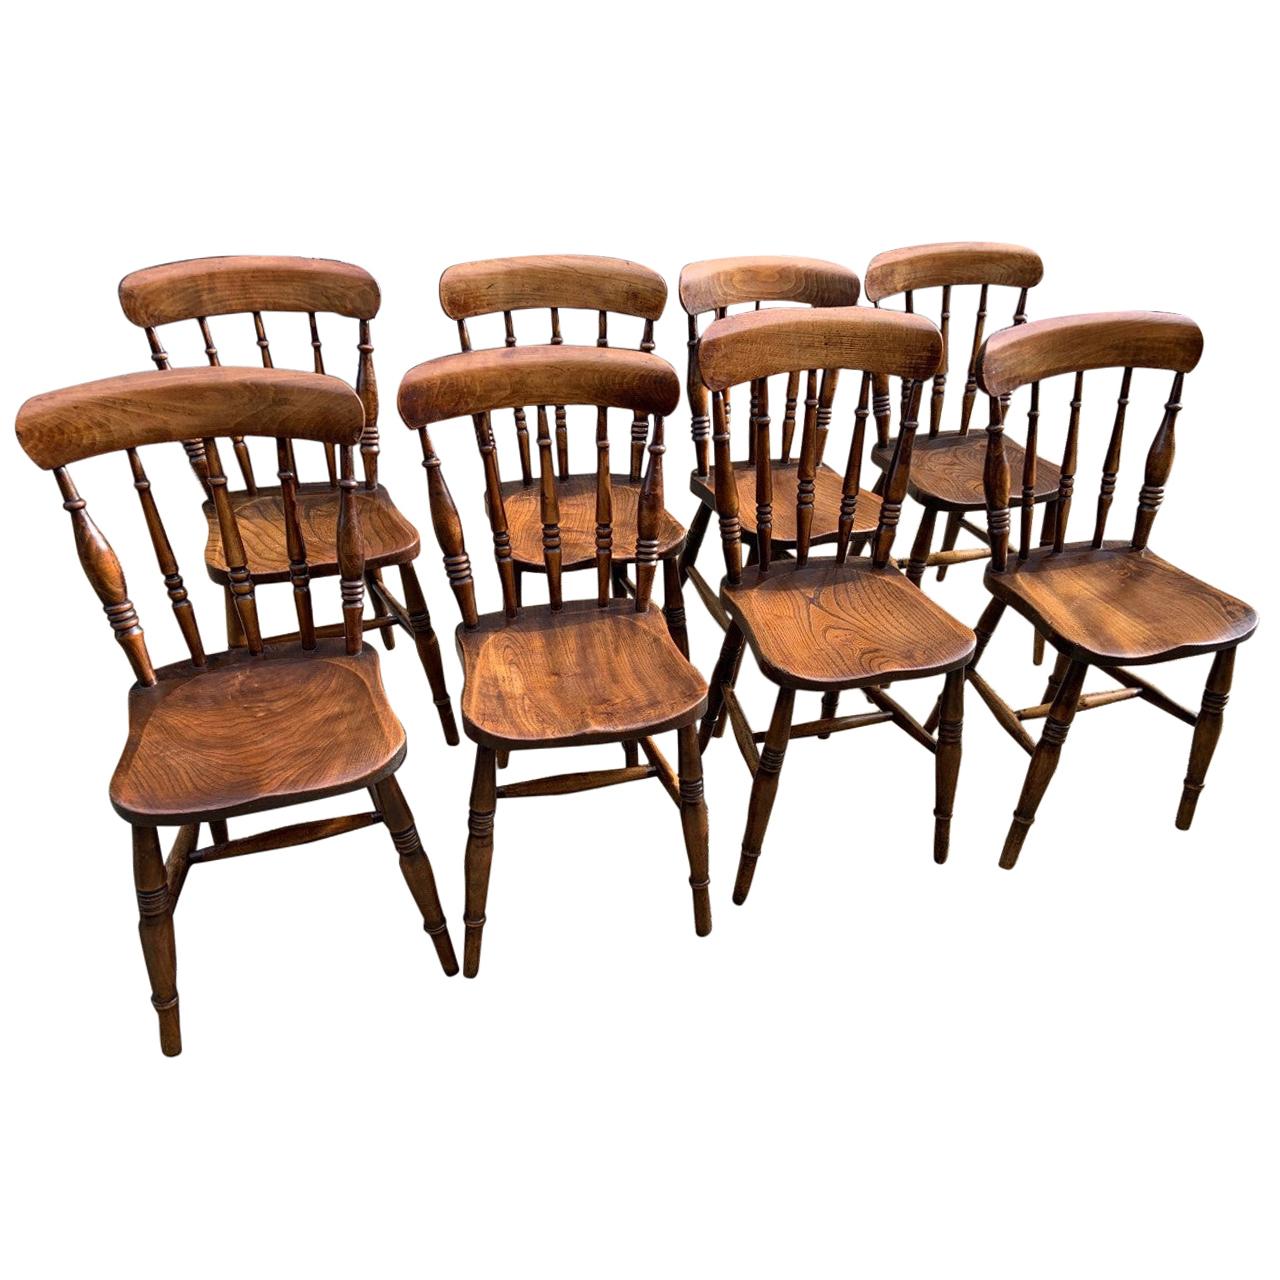 19th Century True Set of Antique Spindle Back Chairs